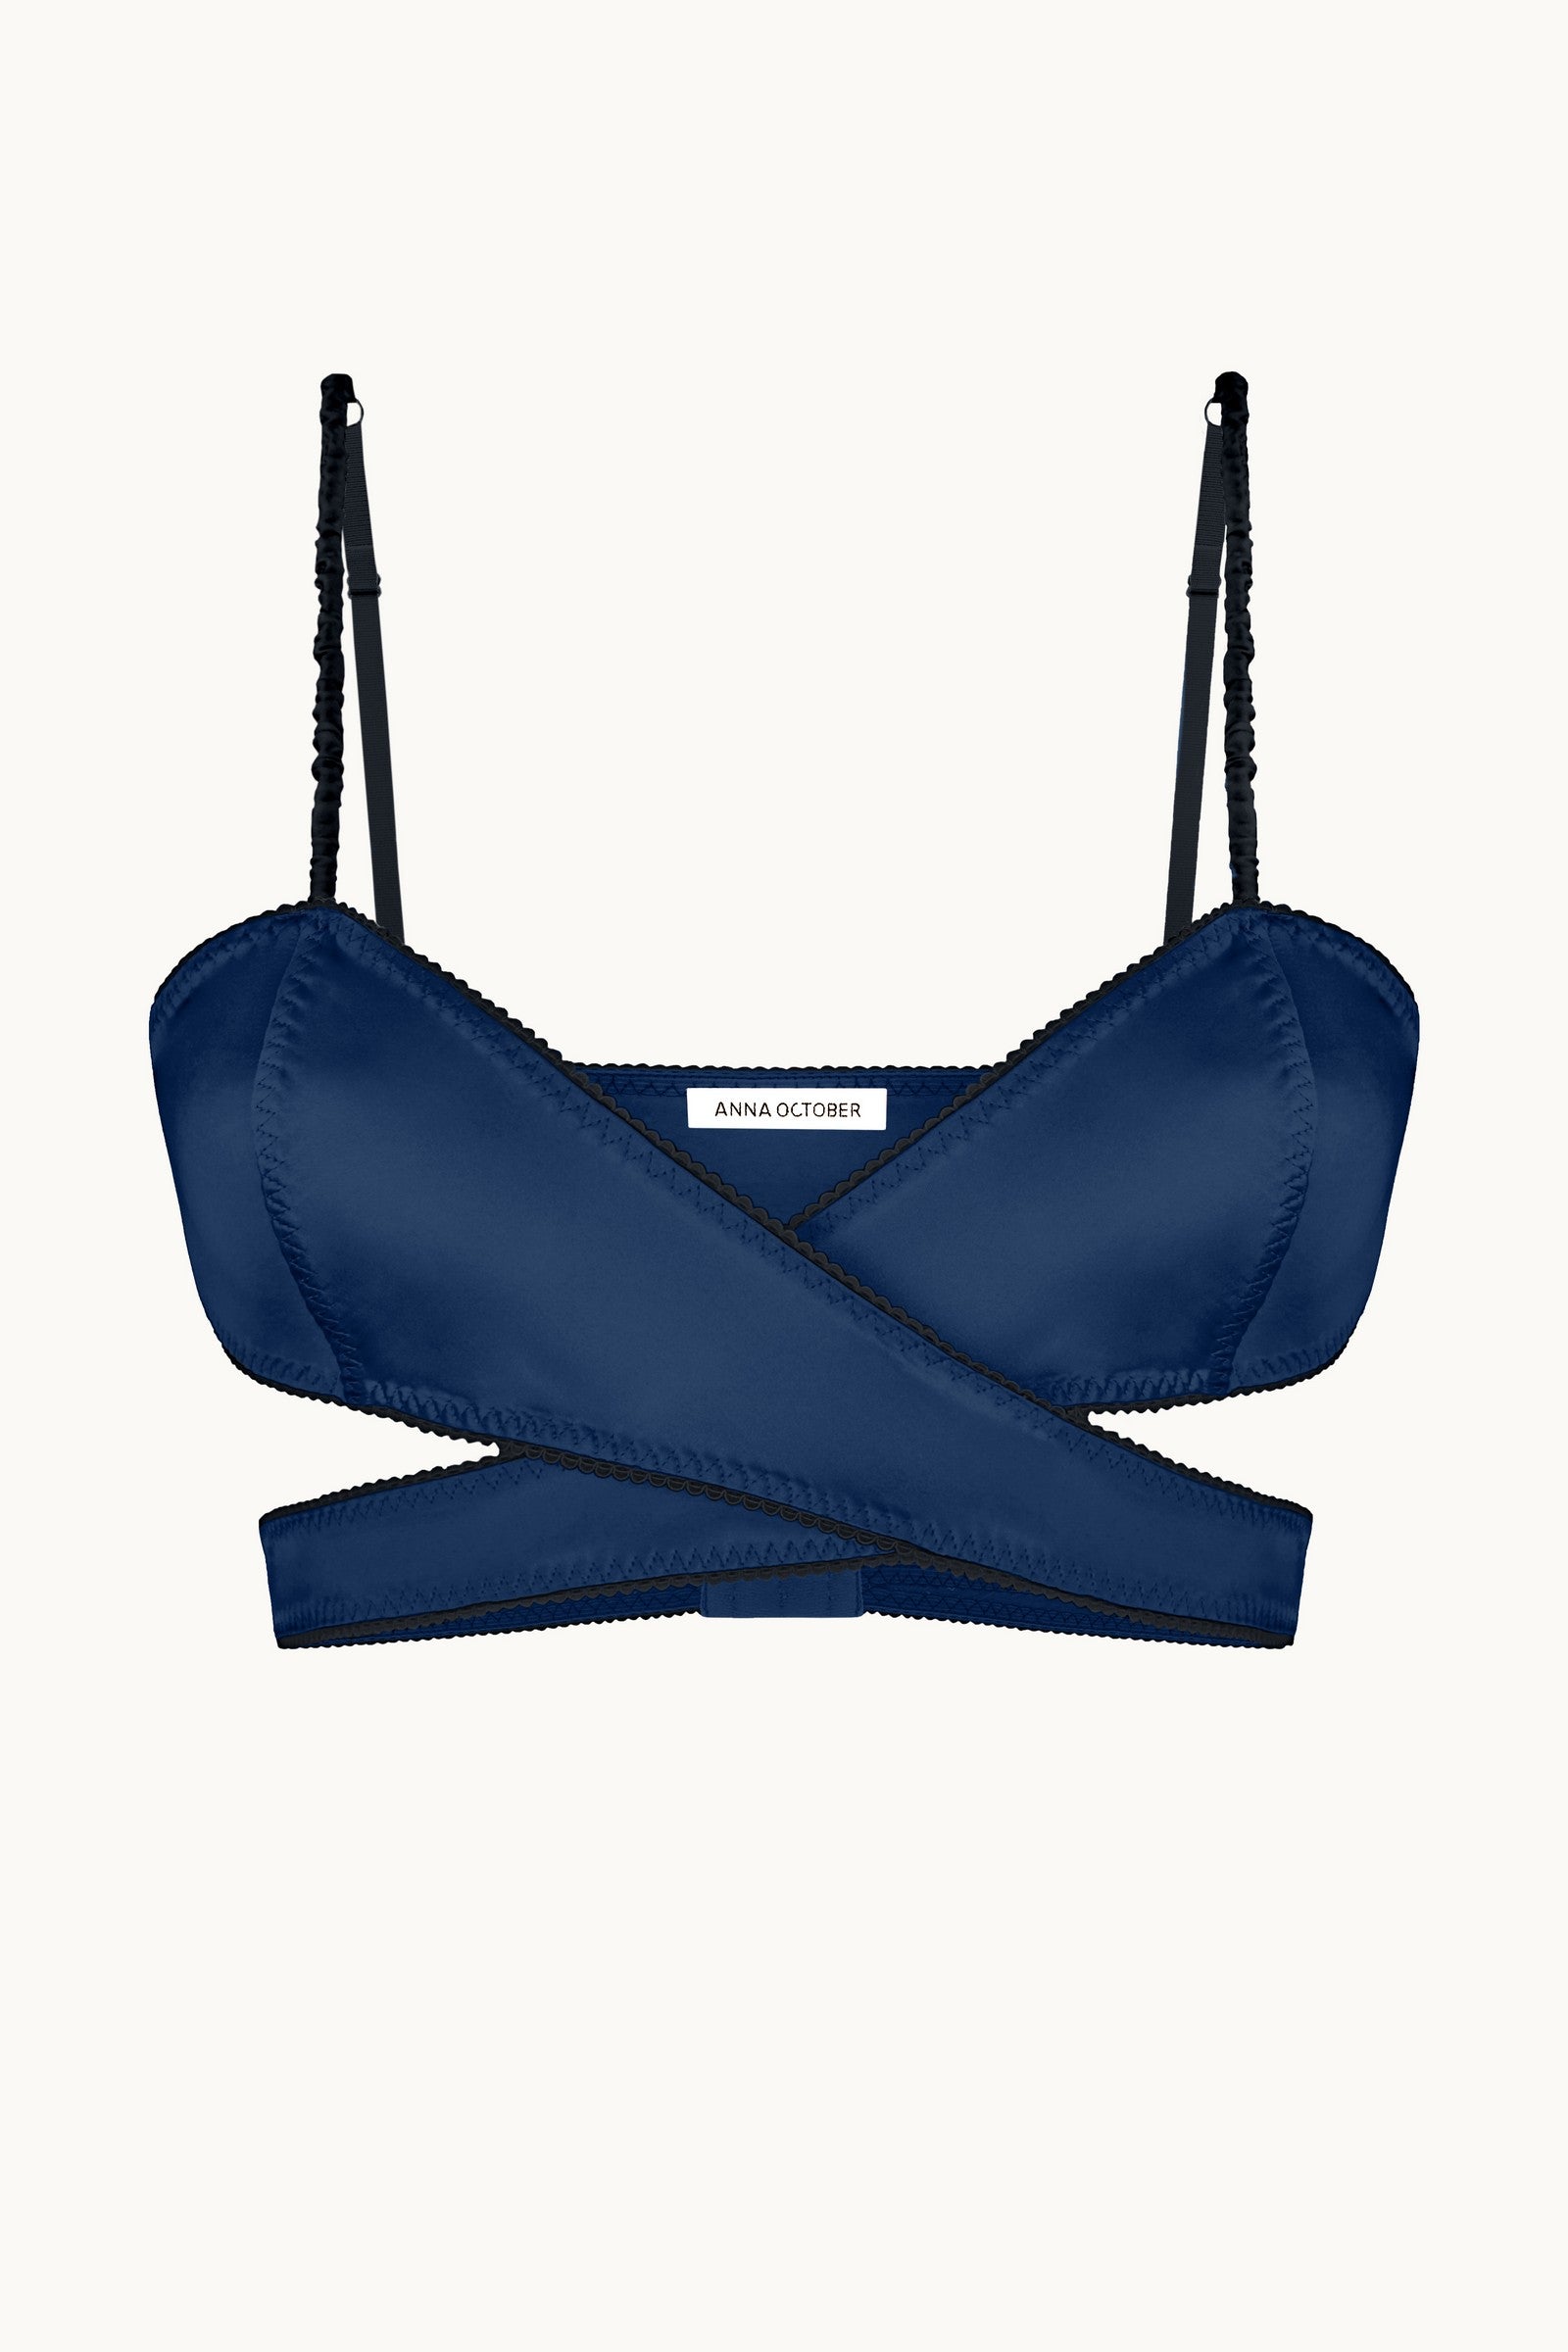 Off-White Élin Bralette by Anna October on Sale